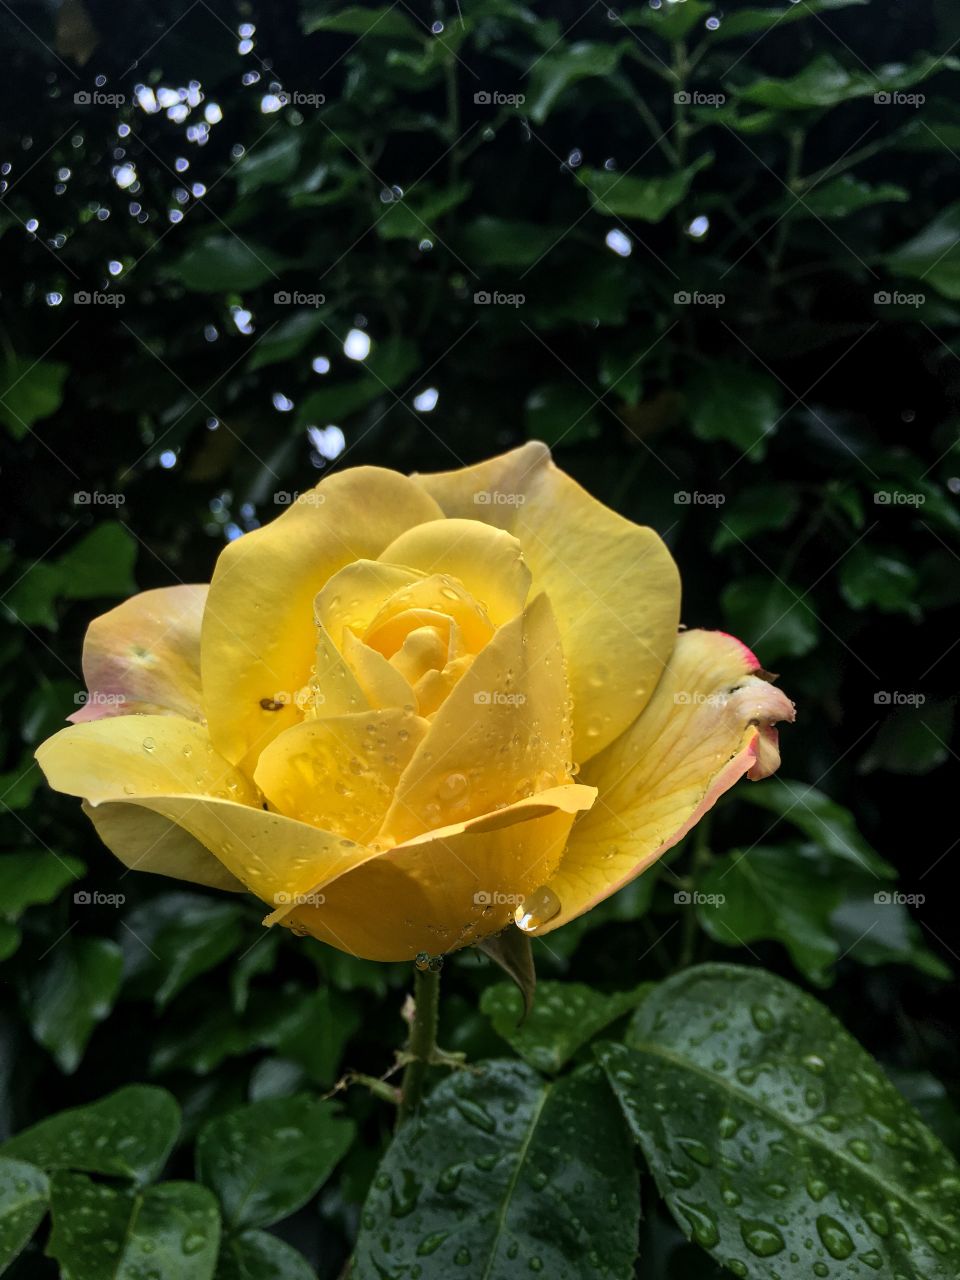 The yellow Rose